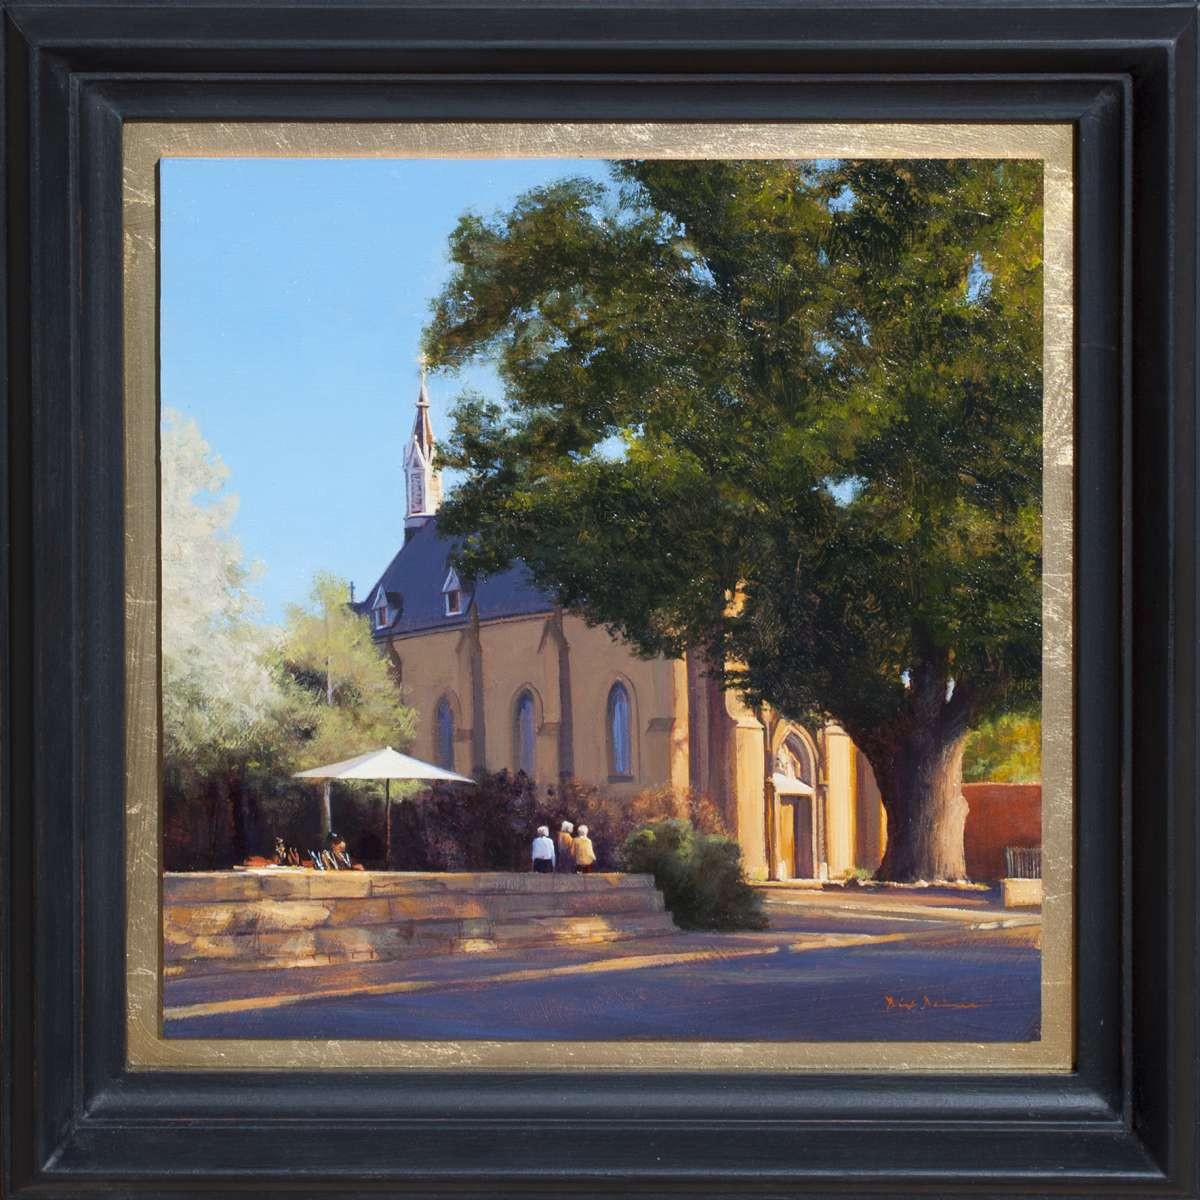 painting of the Loretto Chapel in Santa Fe by Dix Baines